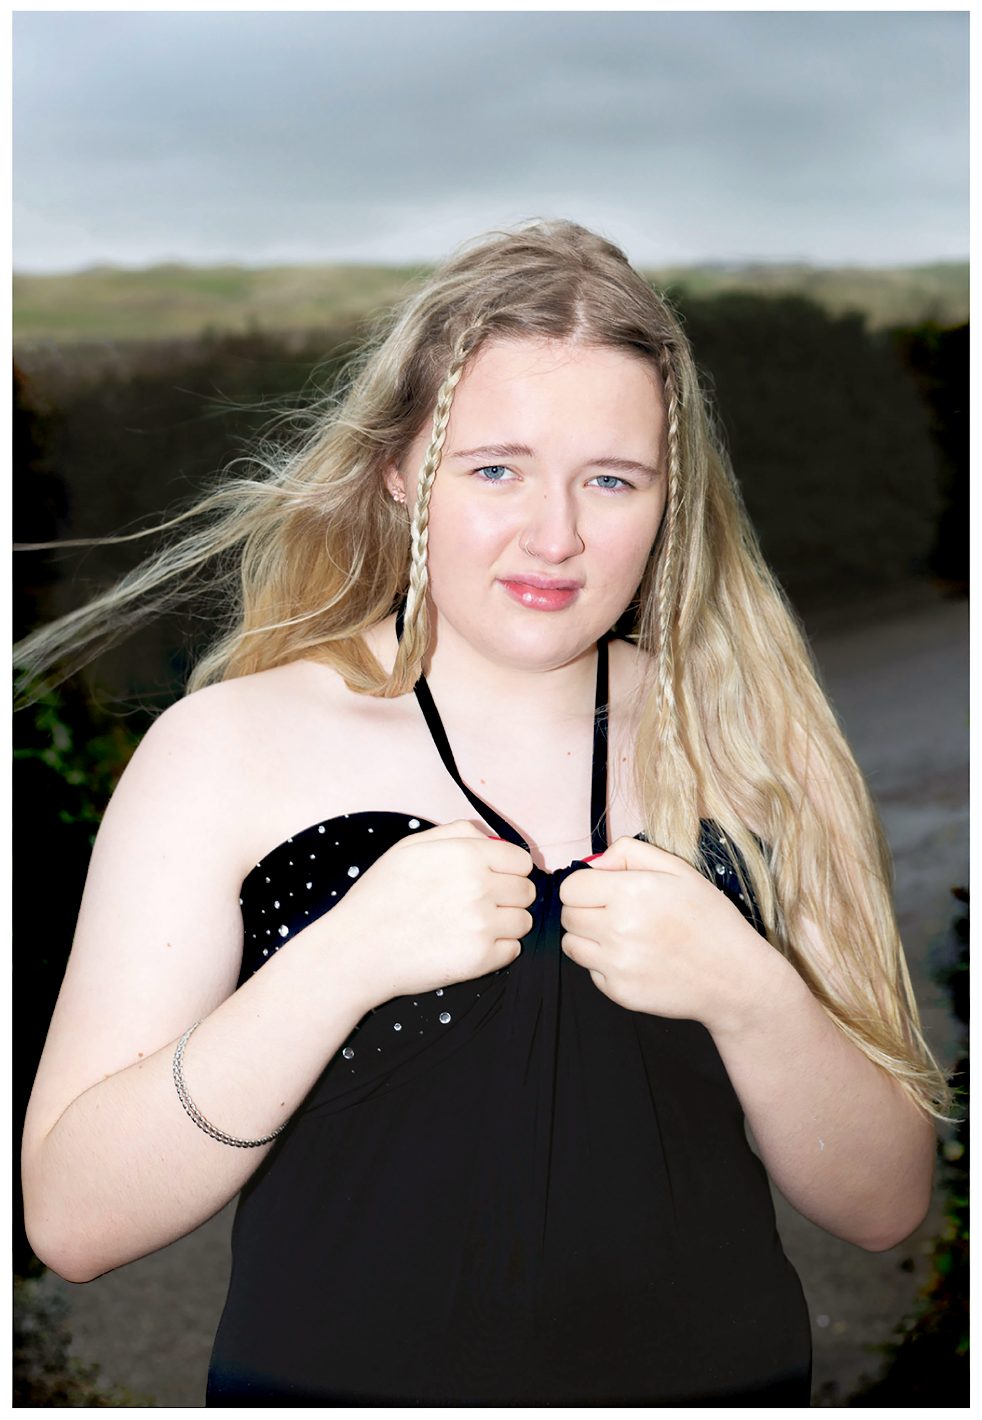 Image shows a photo by Fran Rowse of a young white woman with long blond hair wearing a black halterneck dress